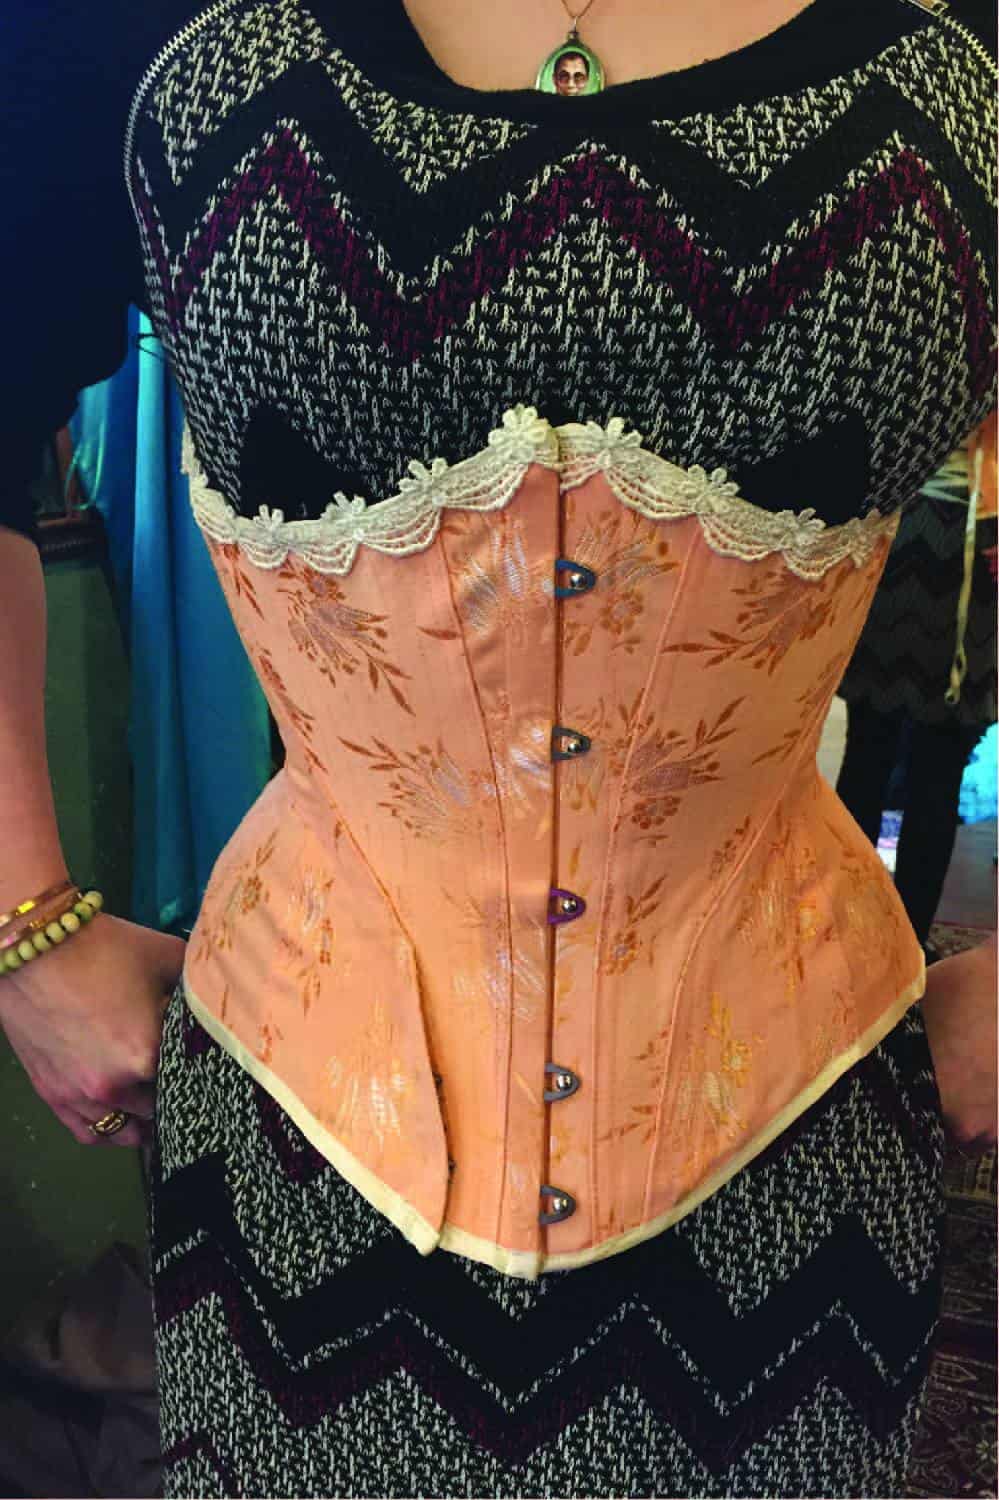 View the Custom Made Corset & Waist Training Corset we have with us